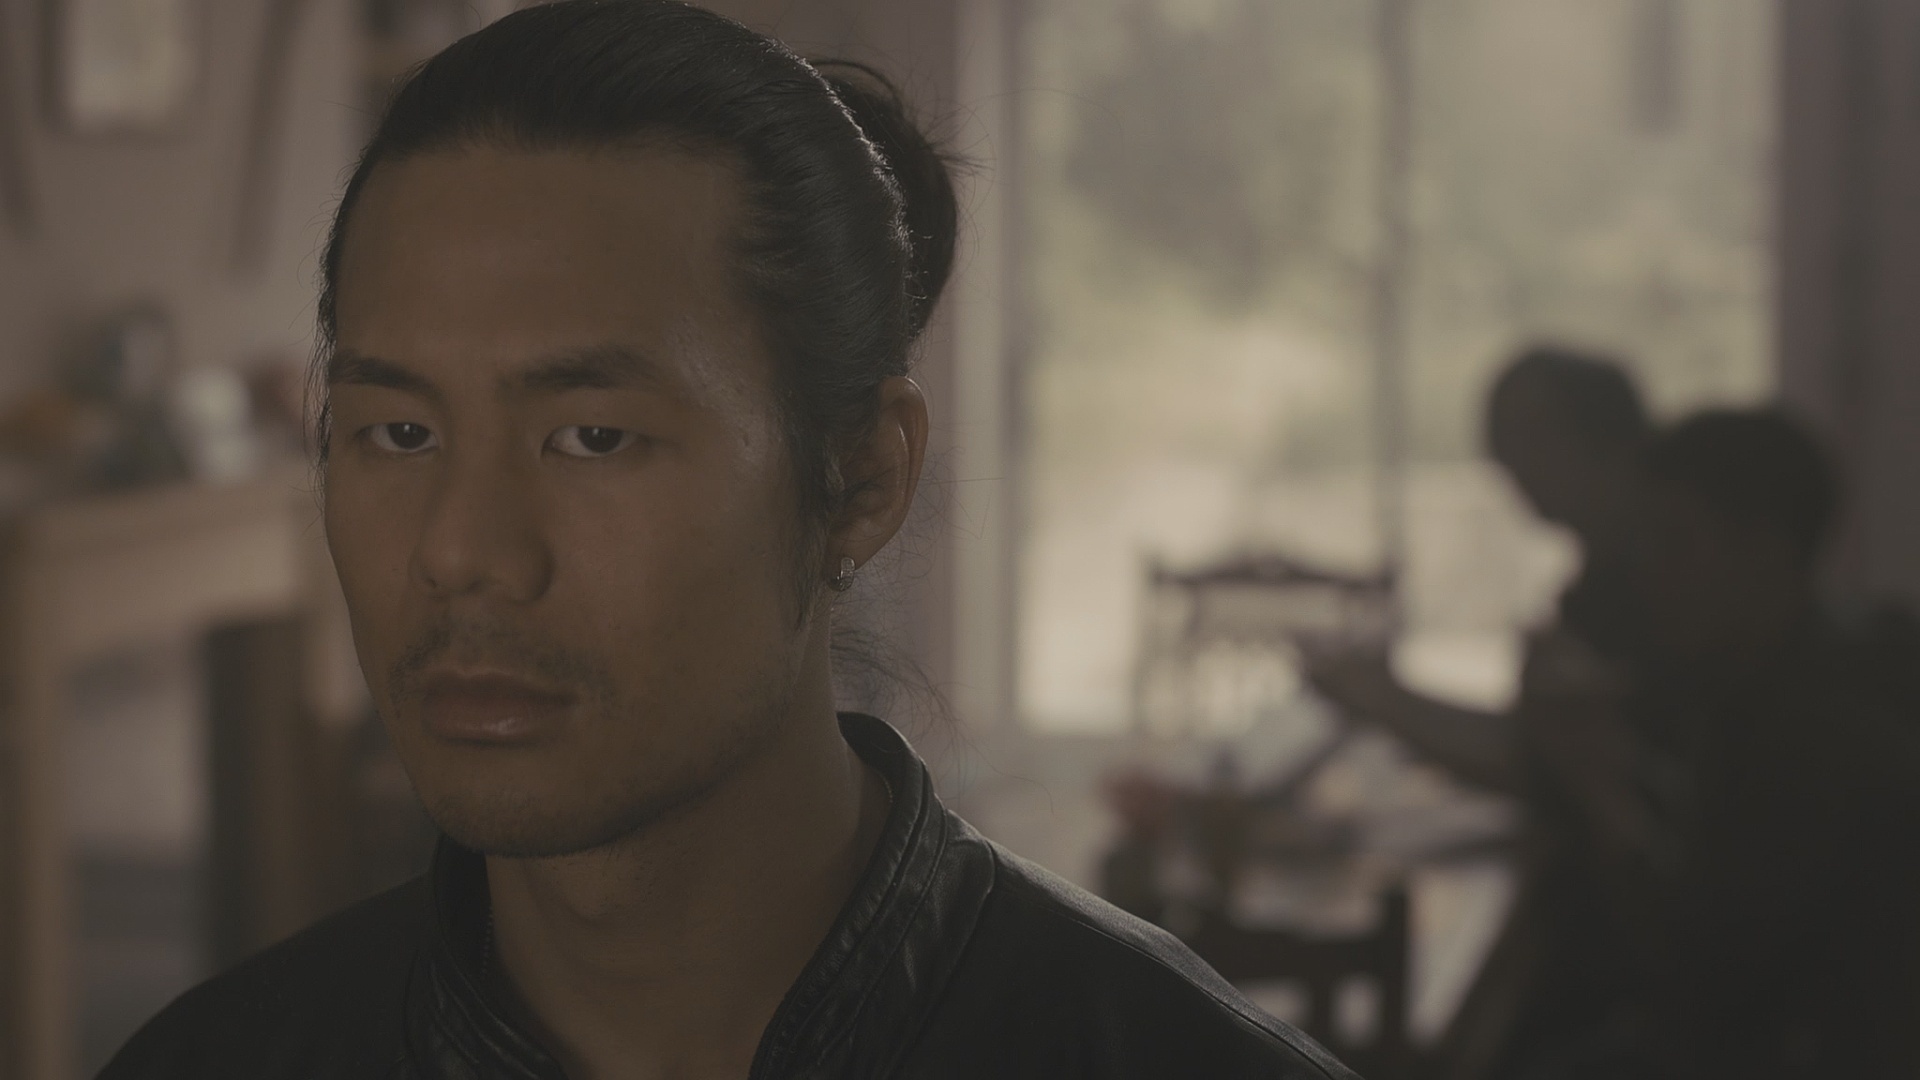 Still from JAPANESE SAMURAI SWORD - A Short Film in association with FILM LONDON & the BFI. Directed by Lab Ky Mo.